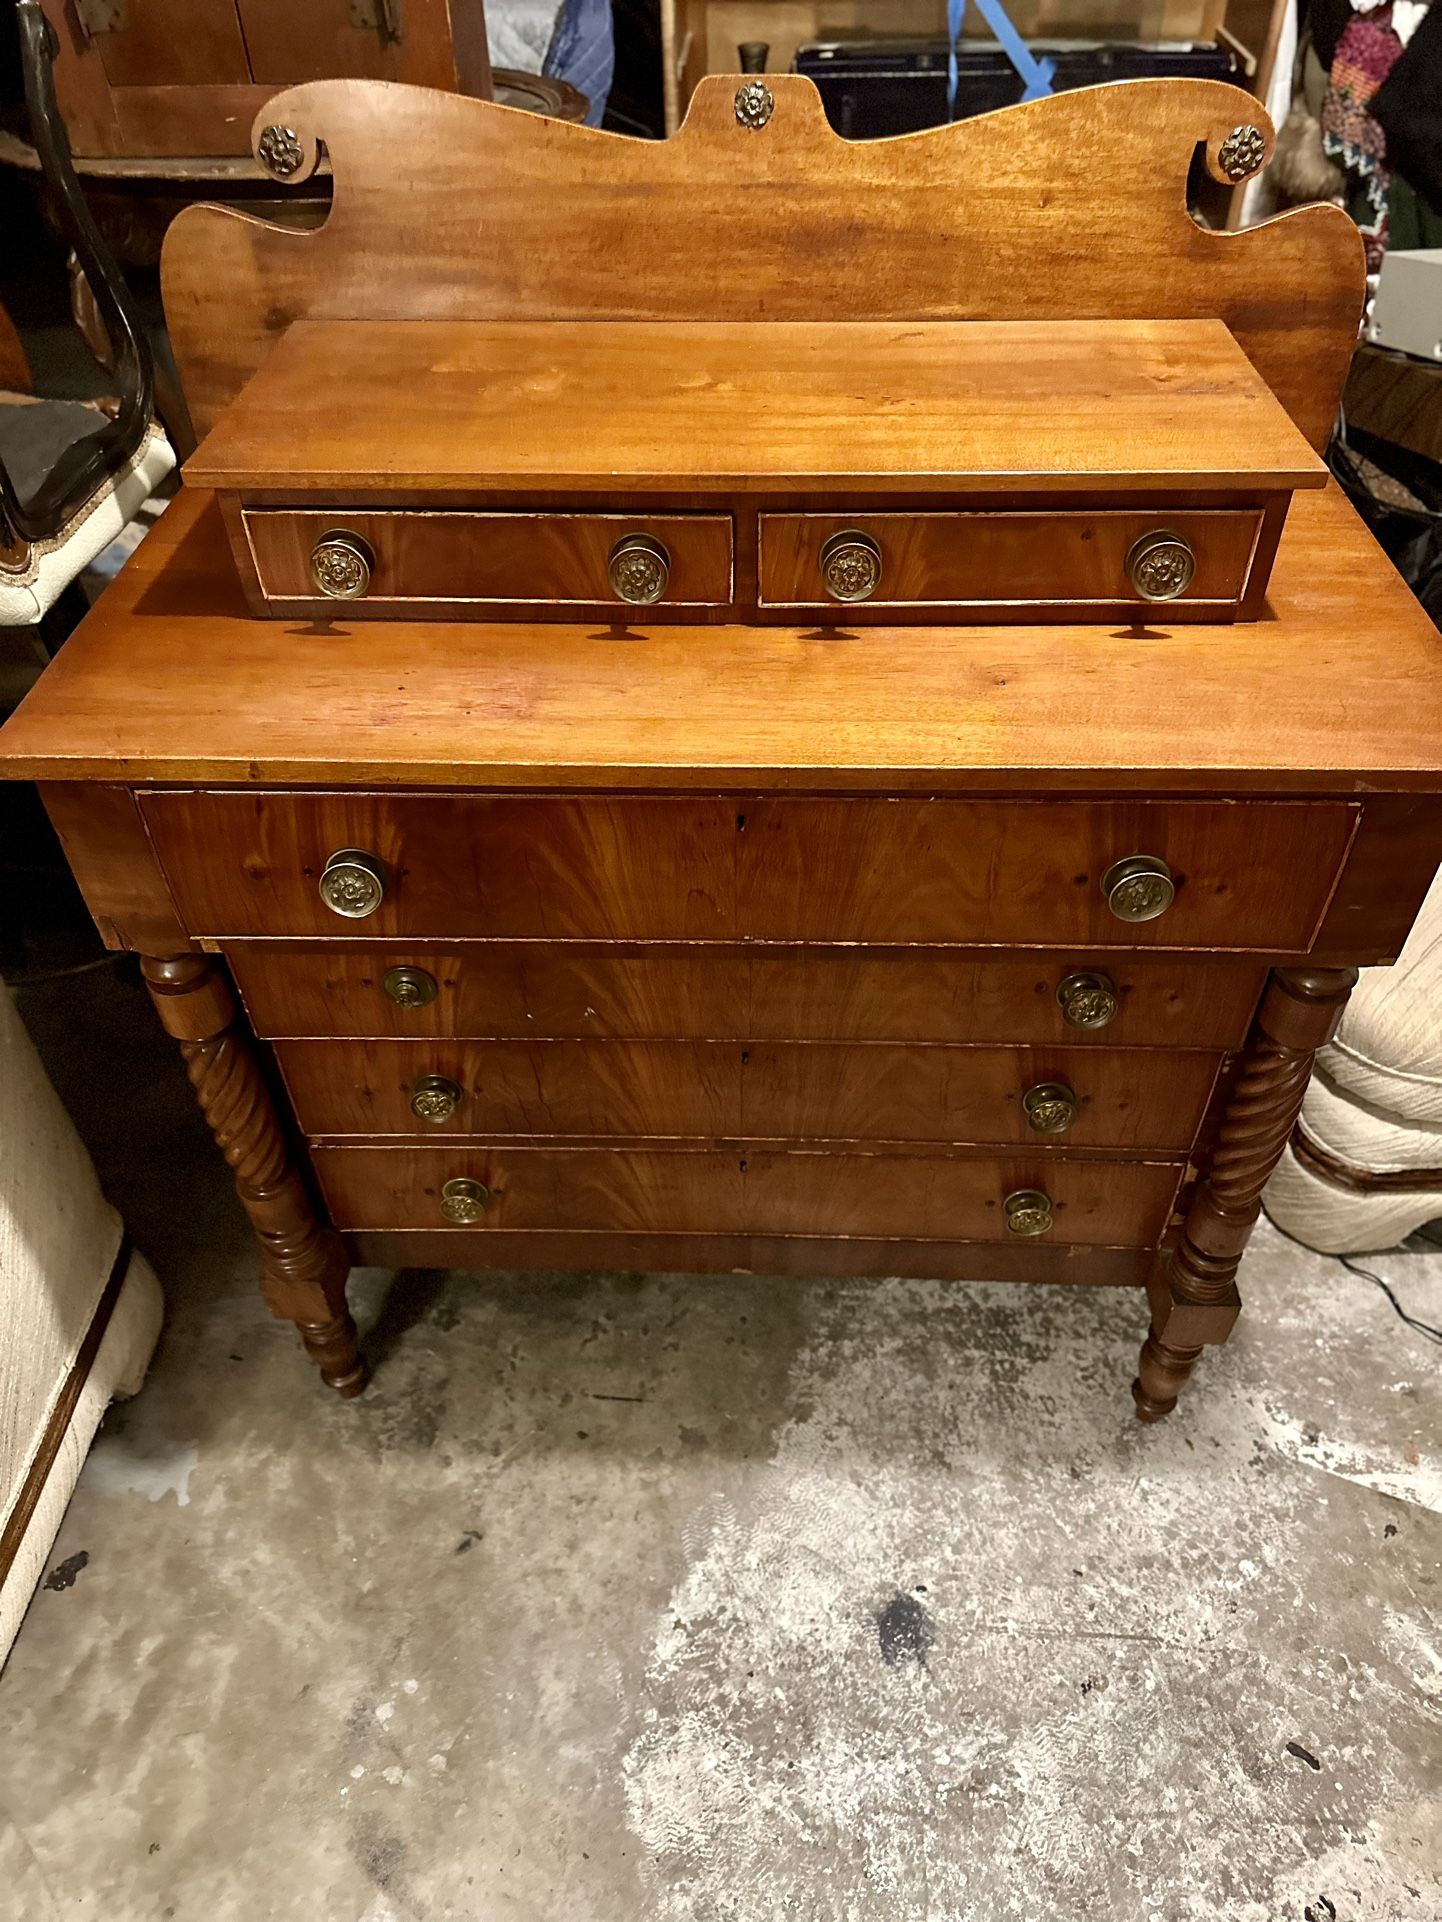 Antique Sheraton Chest or Dresser with Spiral Columns